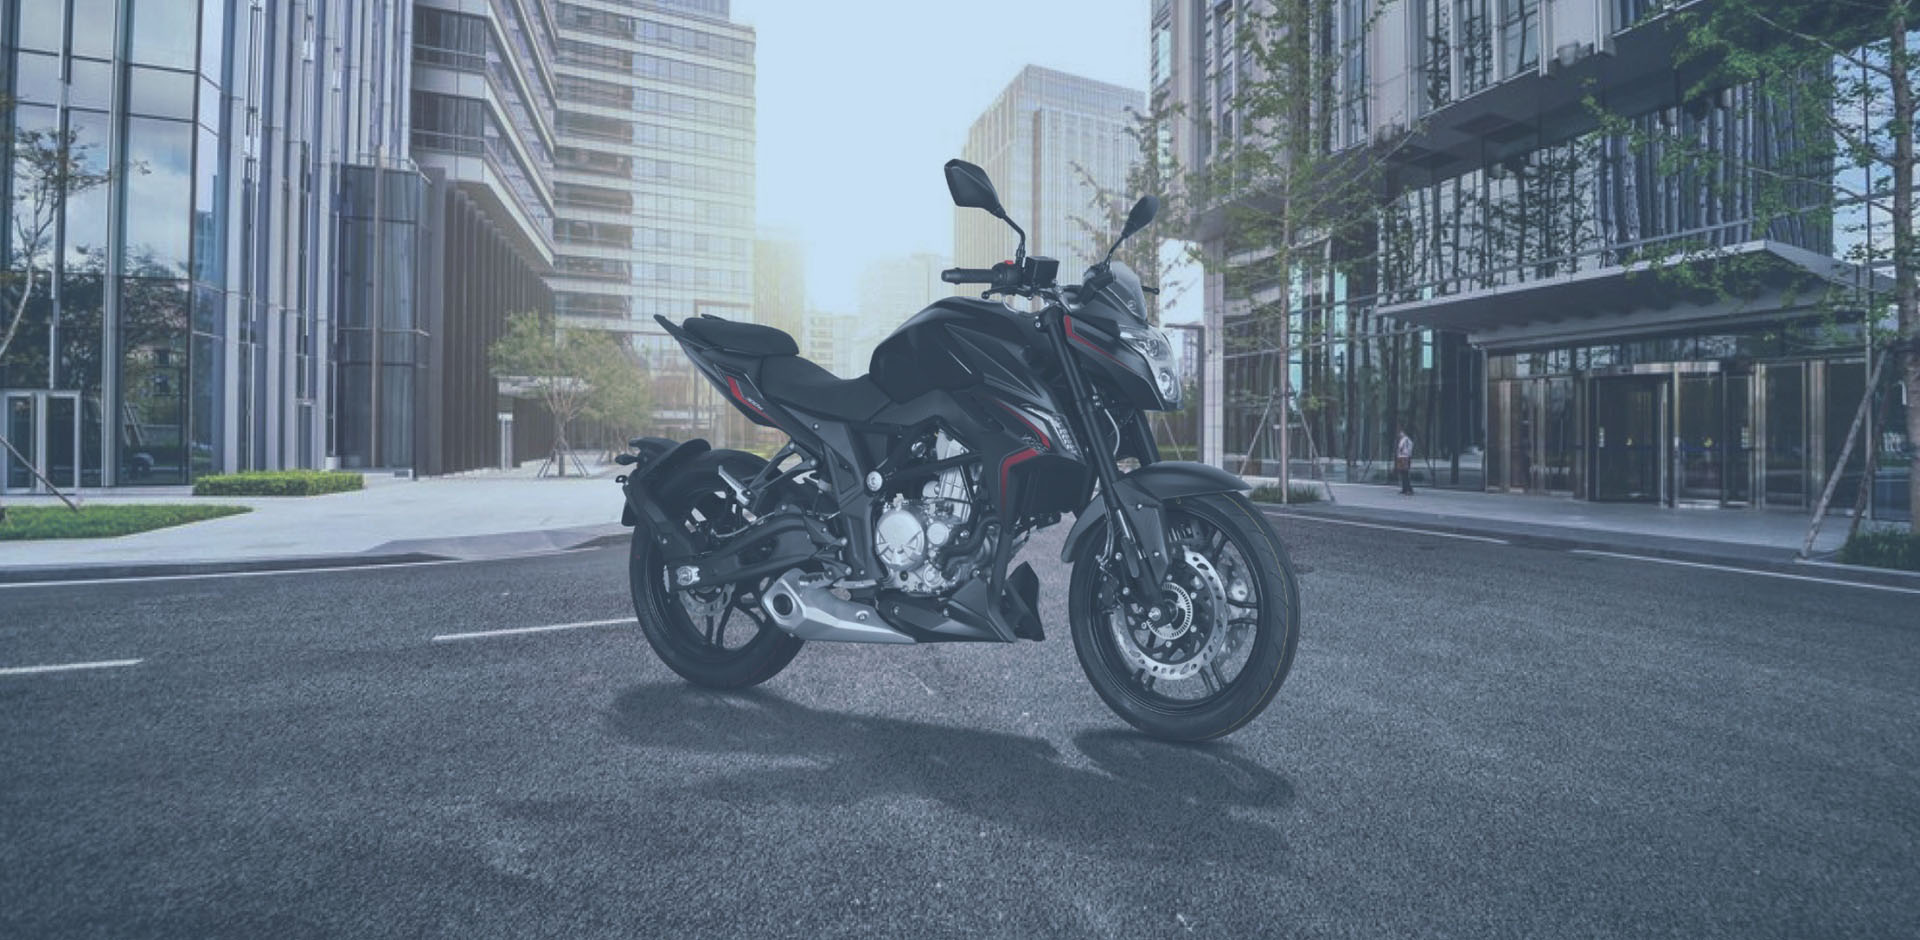 <h3>Driving a visionary engine</h3><h3>toward a pioneer road</h3> <h4>Supplying varieties of motorcycle</h4><h4>from commuting scooter</h4> <h4>and street motorcycle to professional motorcycle sports car</h4>